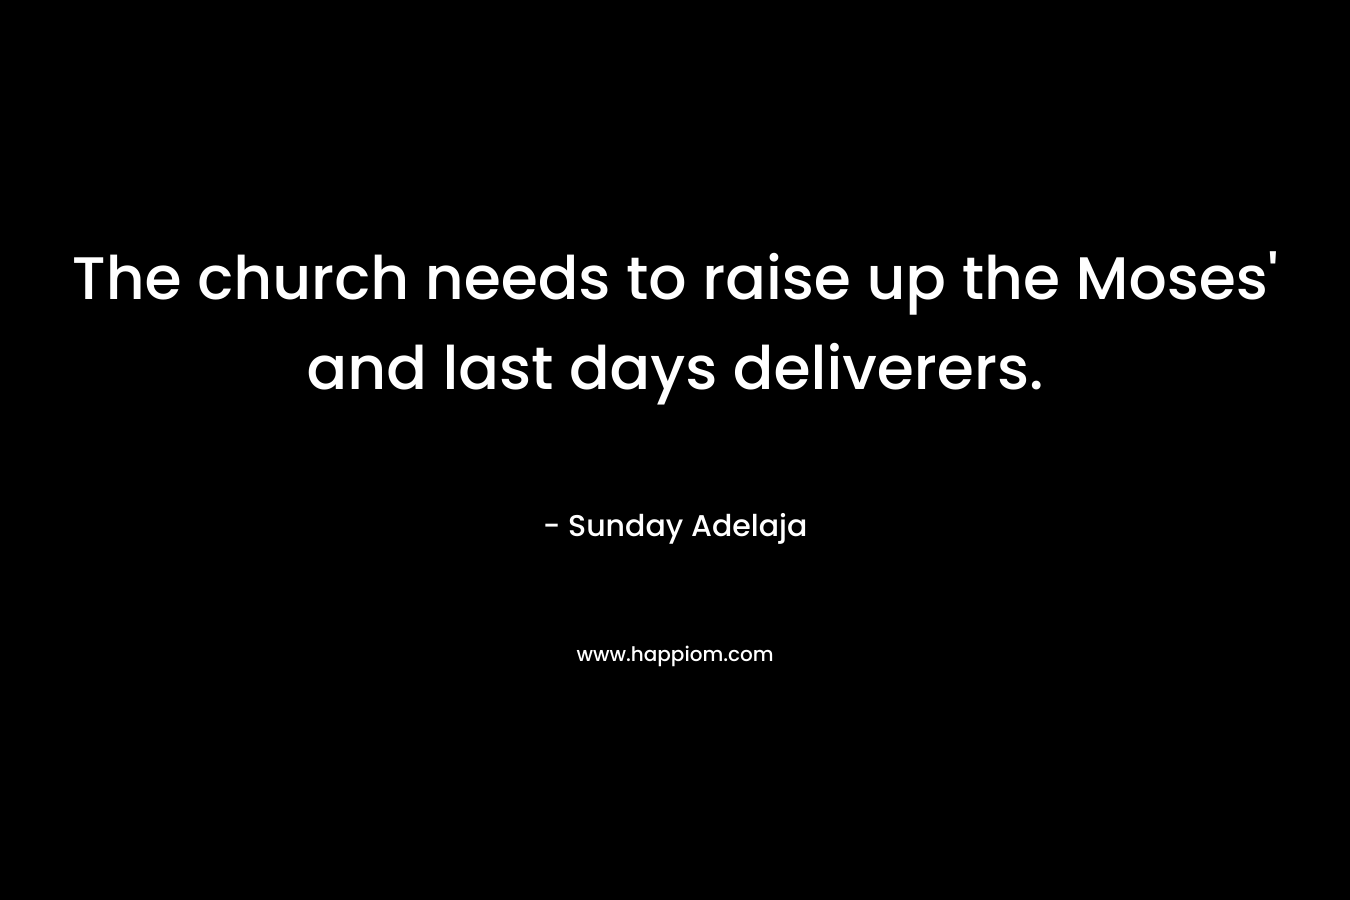 The church needs to raise up the Moses' and last days deliverers.